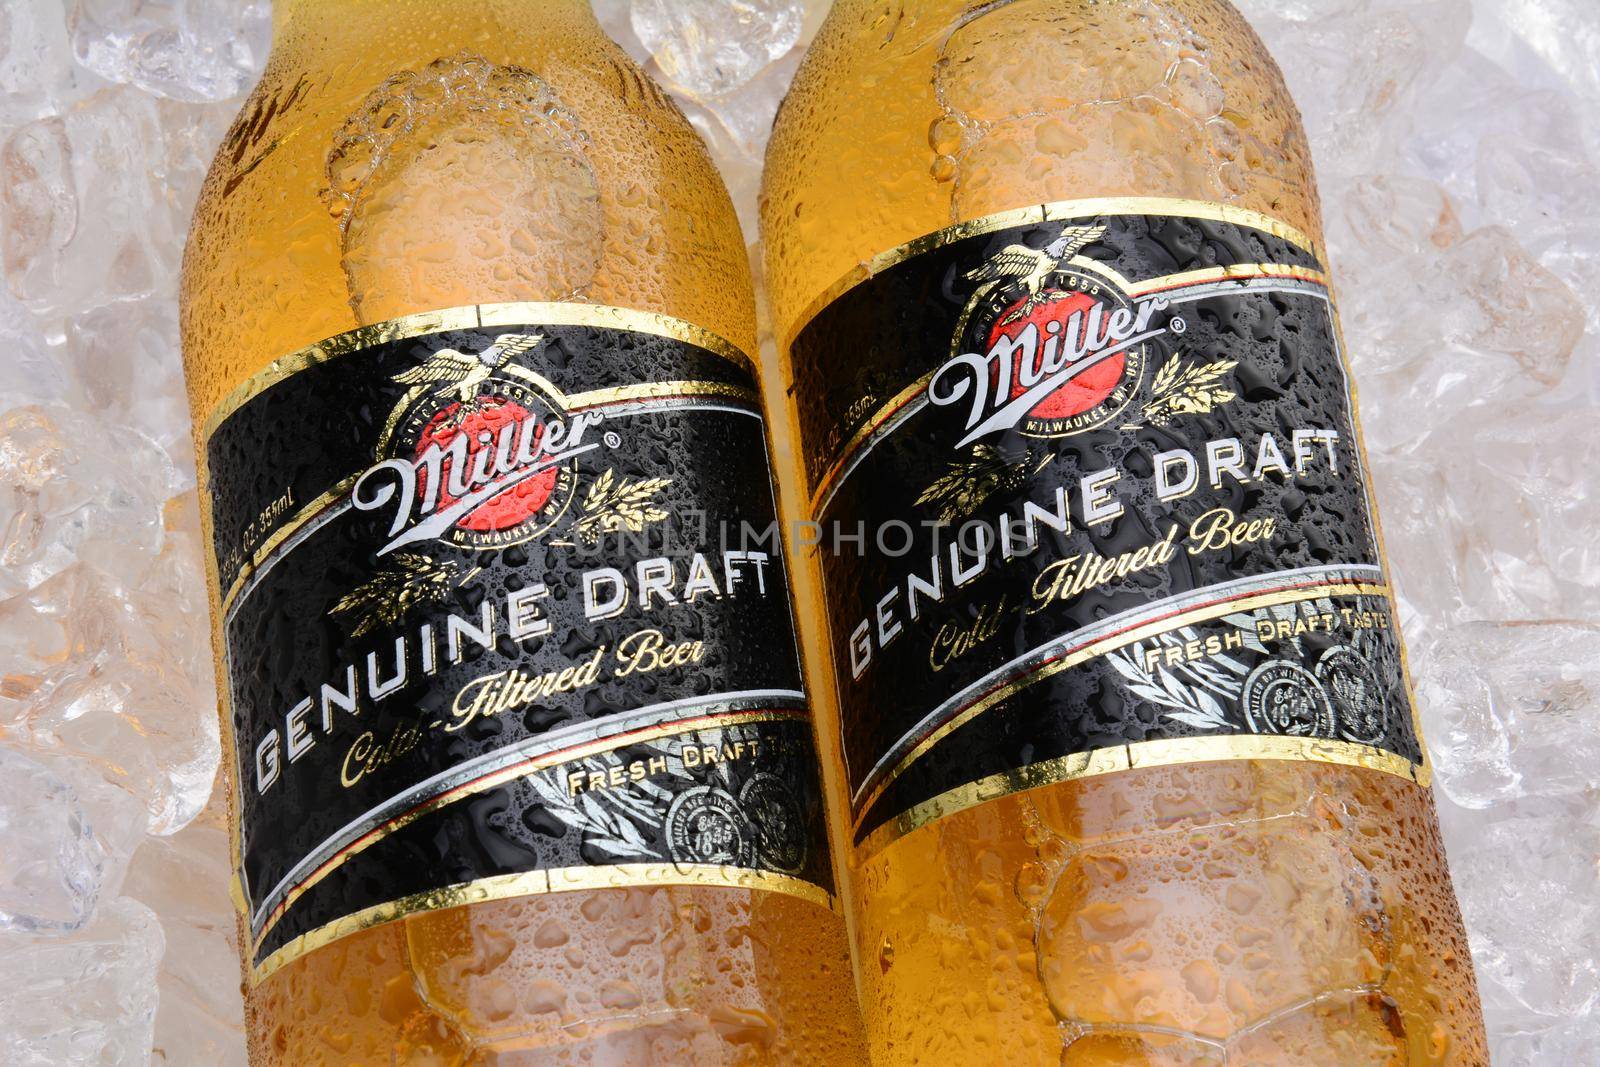 IRVINE, CA - MAY 27, 2014: Two Bottles of Miller Genuine Draft, on ice. MGD is actually made from the same recipe as Miller High Life except it is cold filtered.